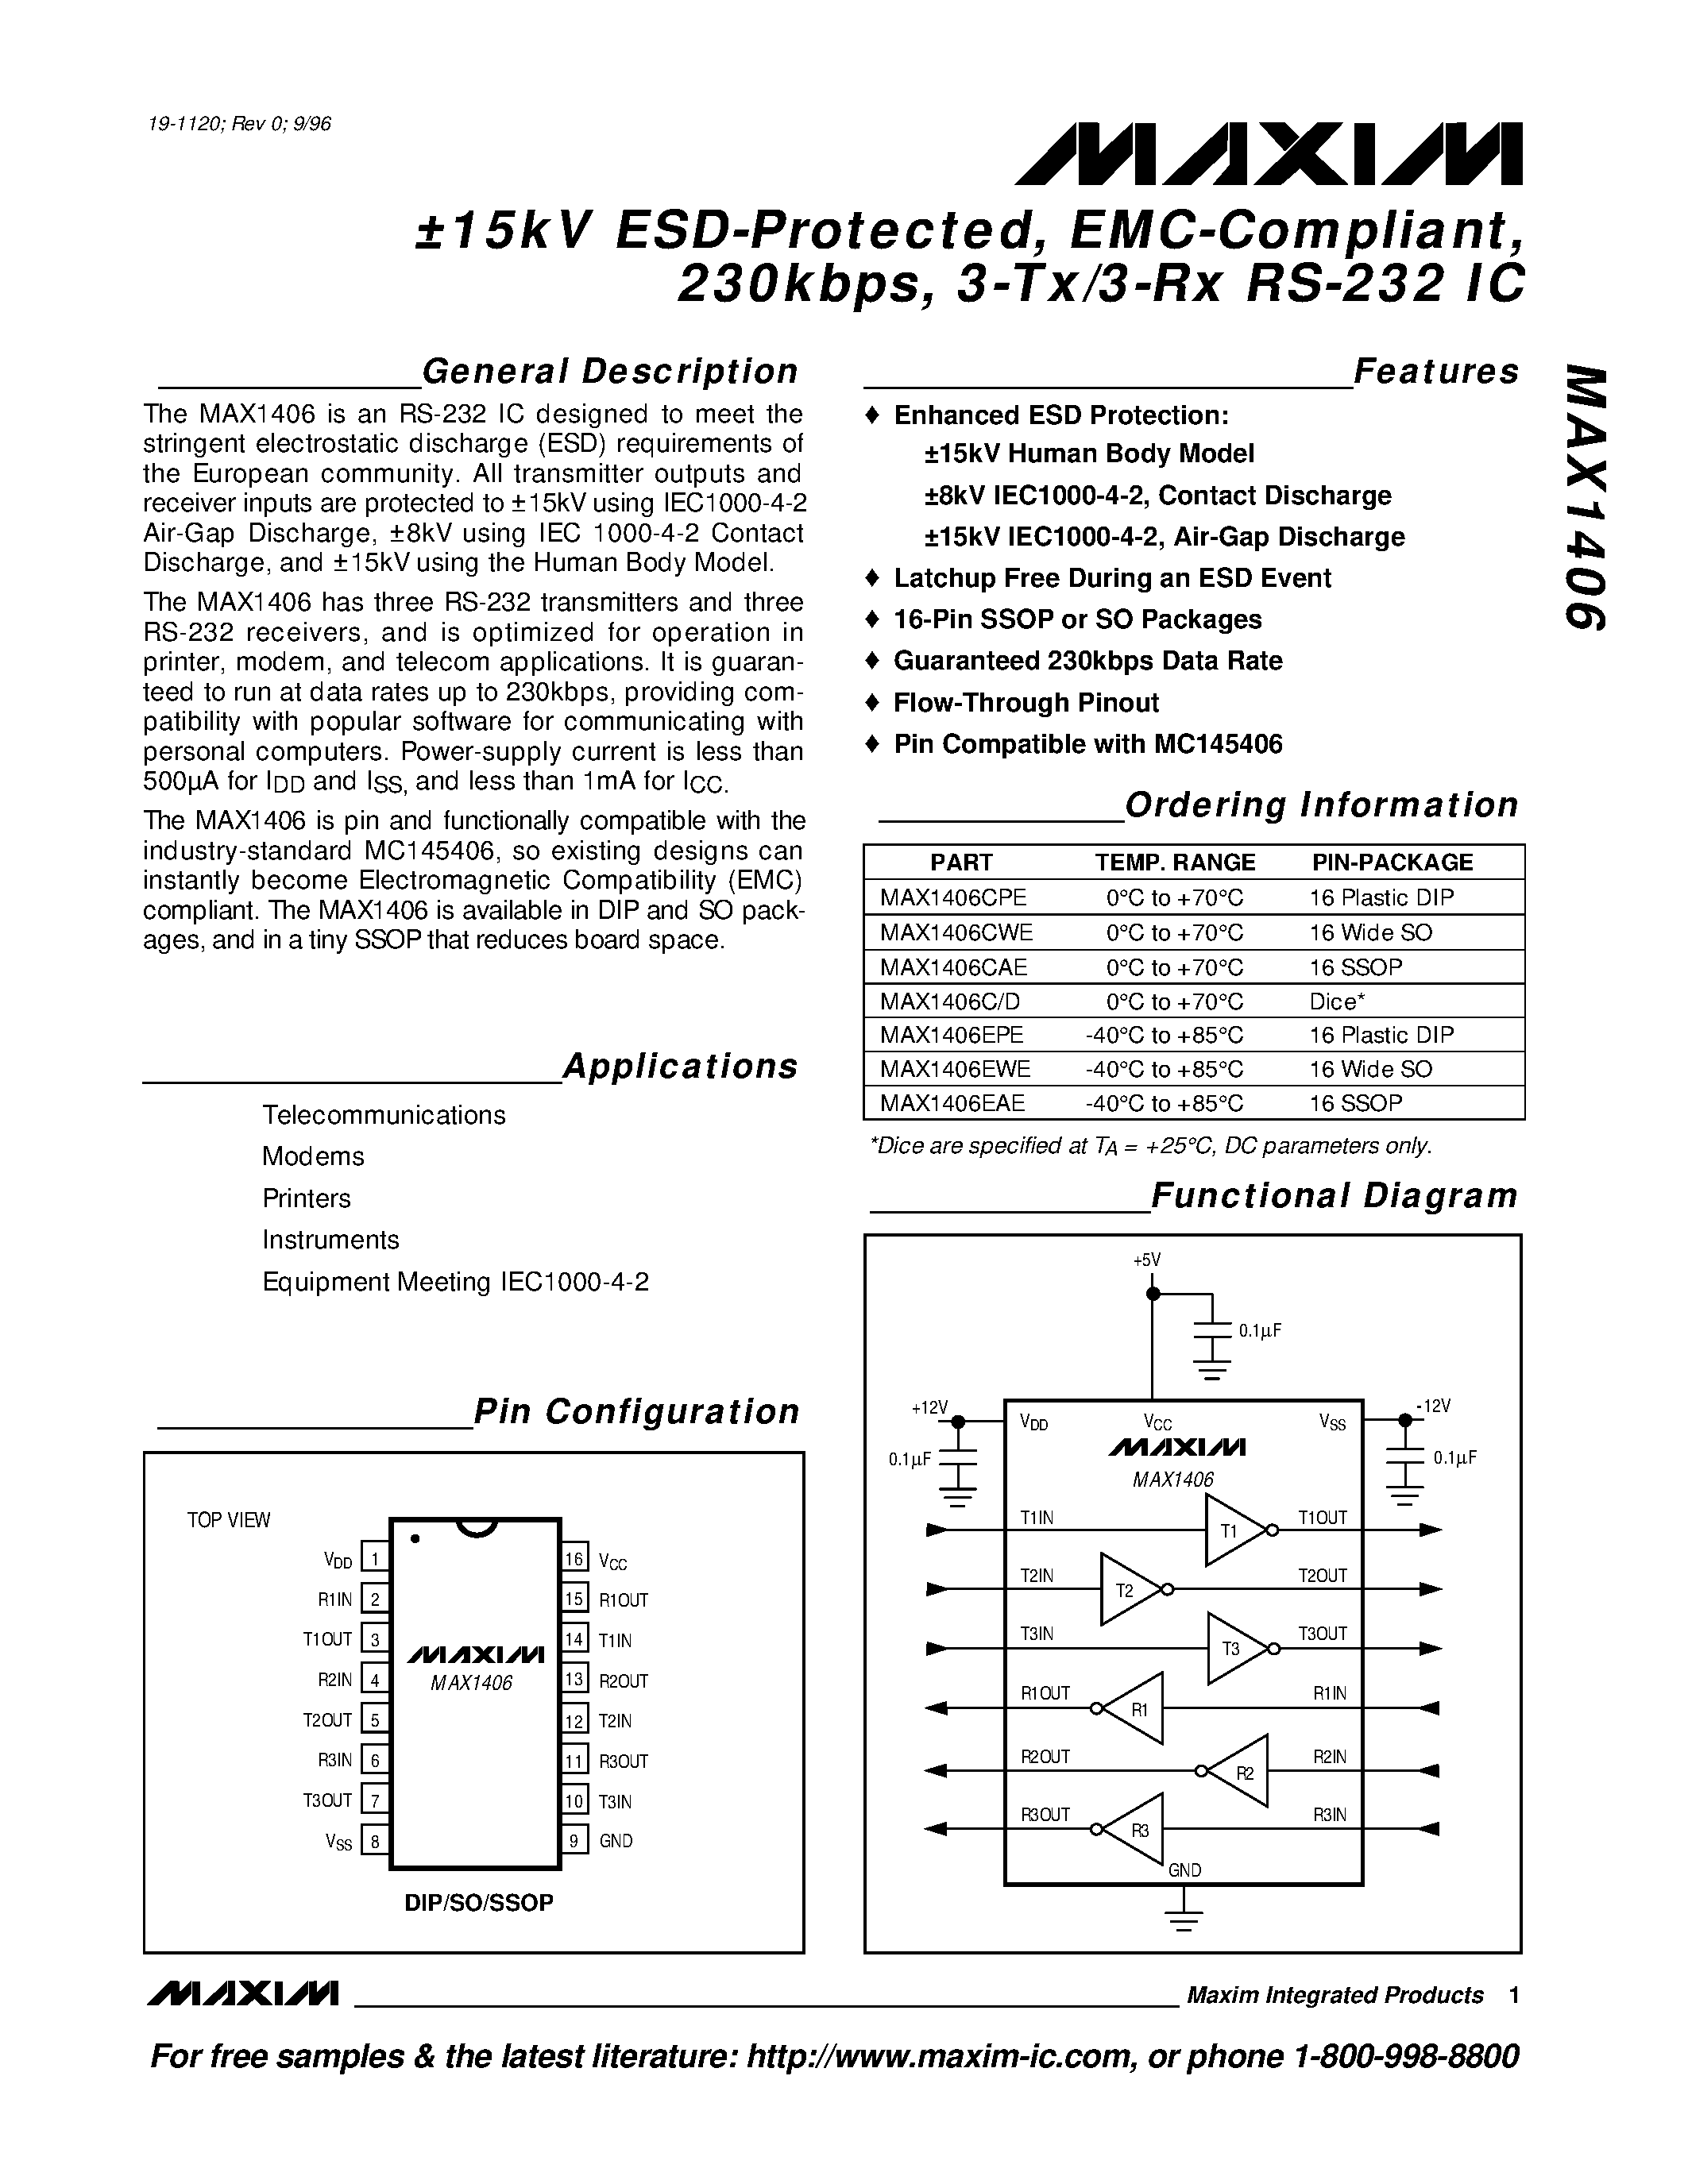 Datasheet MAX1406CWE - 15kV ESD-Protected / EMC-Compliant / 230kbps / 3-Tx/3-Rx RS-232 IC page 1